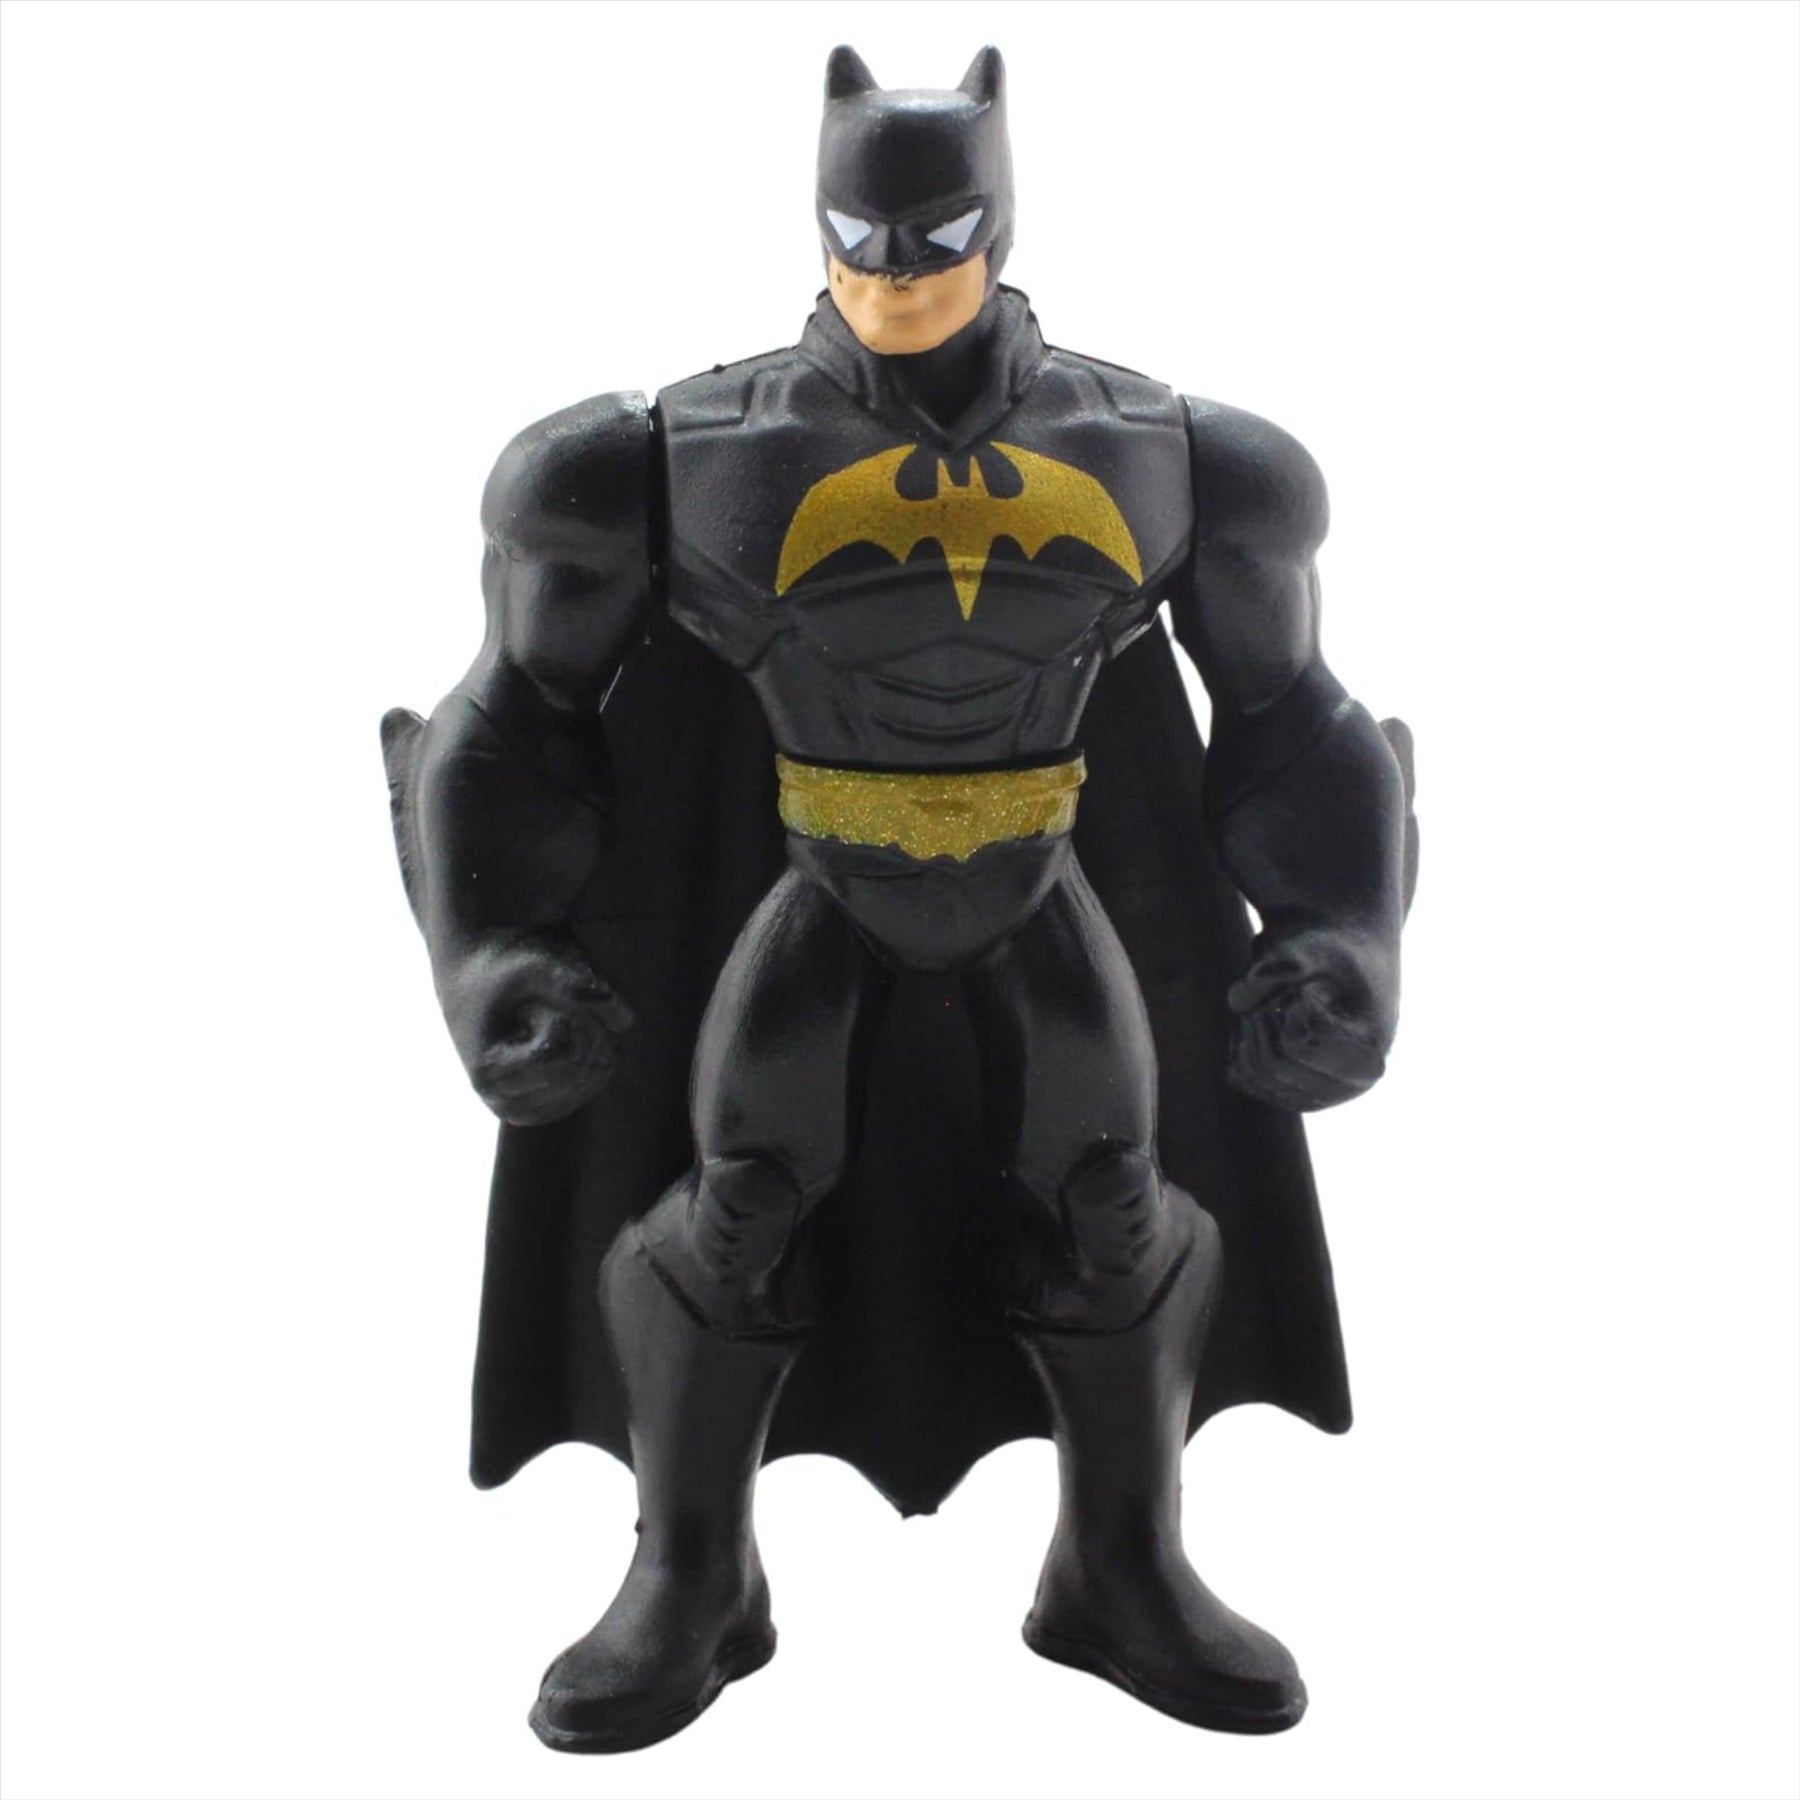 Batman Mighty Mini's - Identified Blind Bag Articulated 2" 5cm Collectible Figures - Series 2 All 6 Characters - Toptoys2u